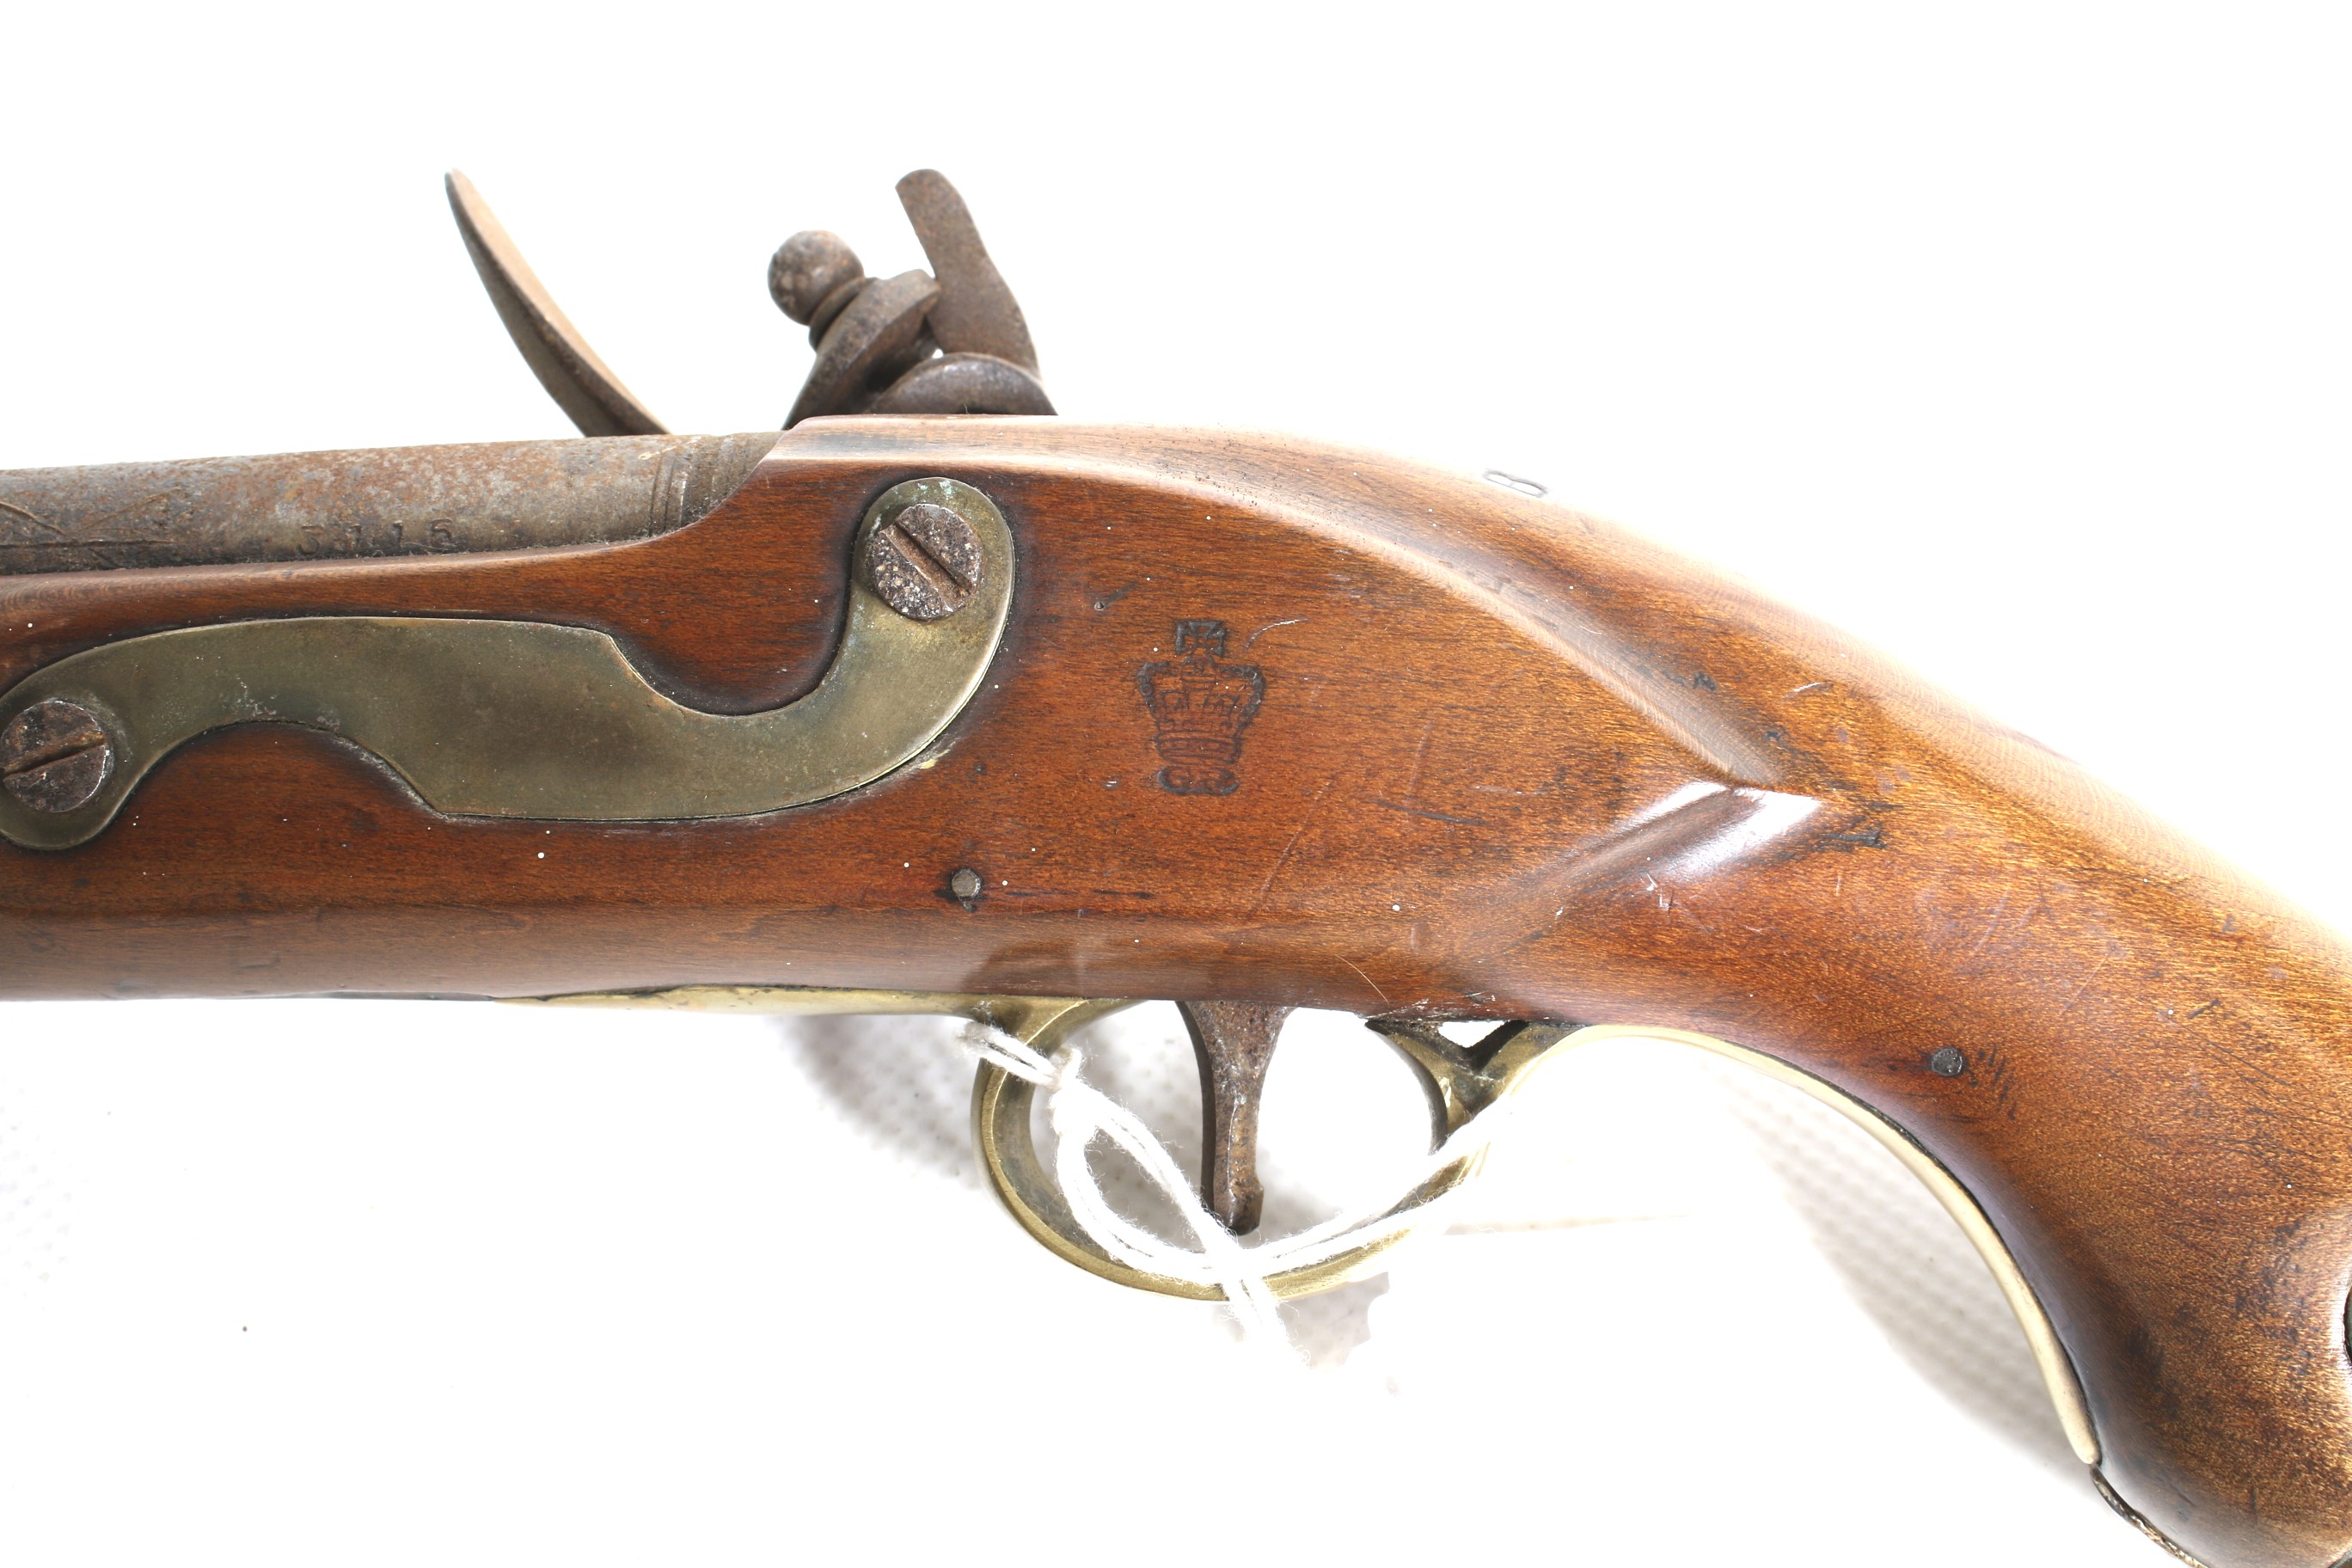 An English flintlock pistol. Circa 1740, 60 calibre, complete with loading rod. - Image 3 of 3